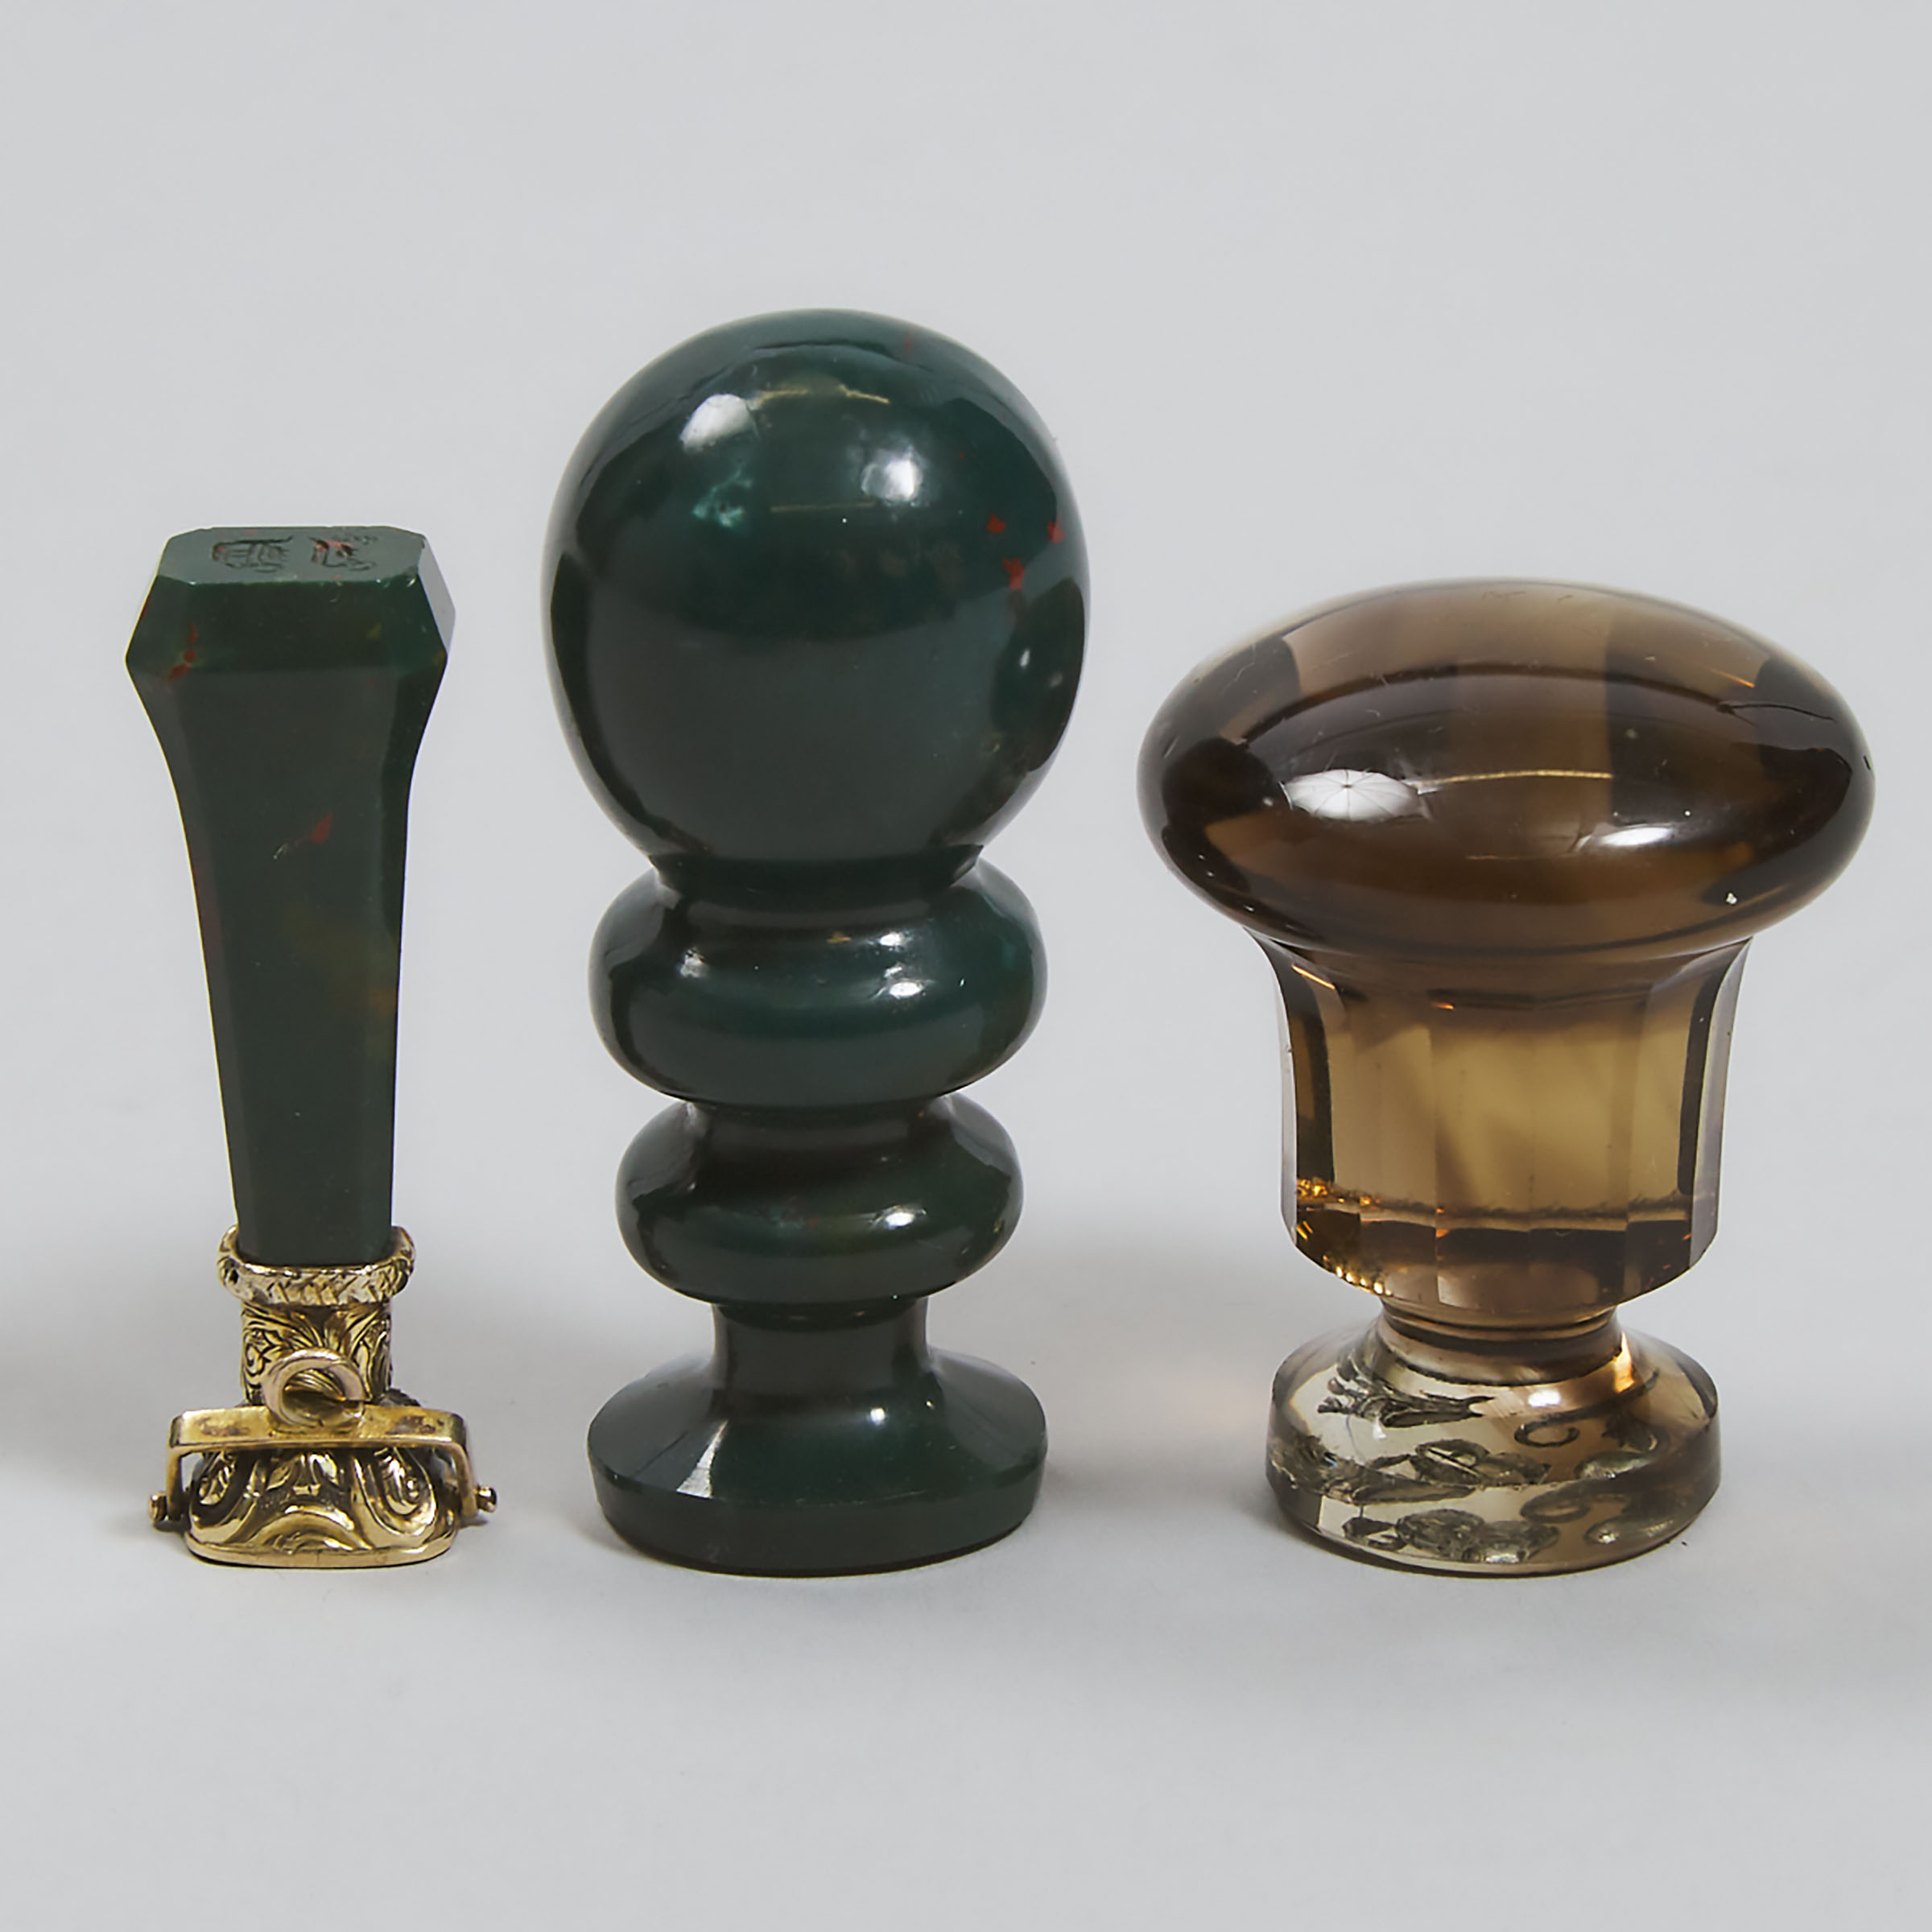 Group of Three Desk Seals, 19th/Early 20th century